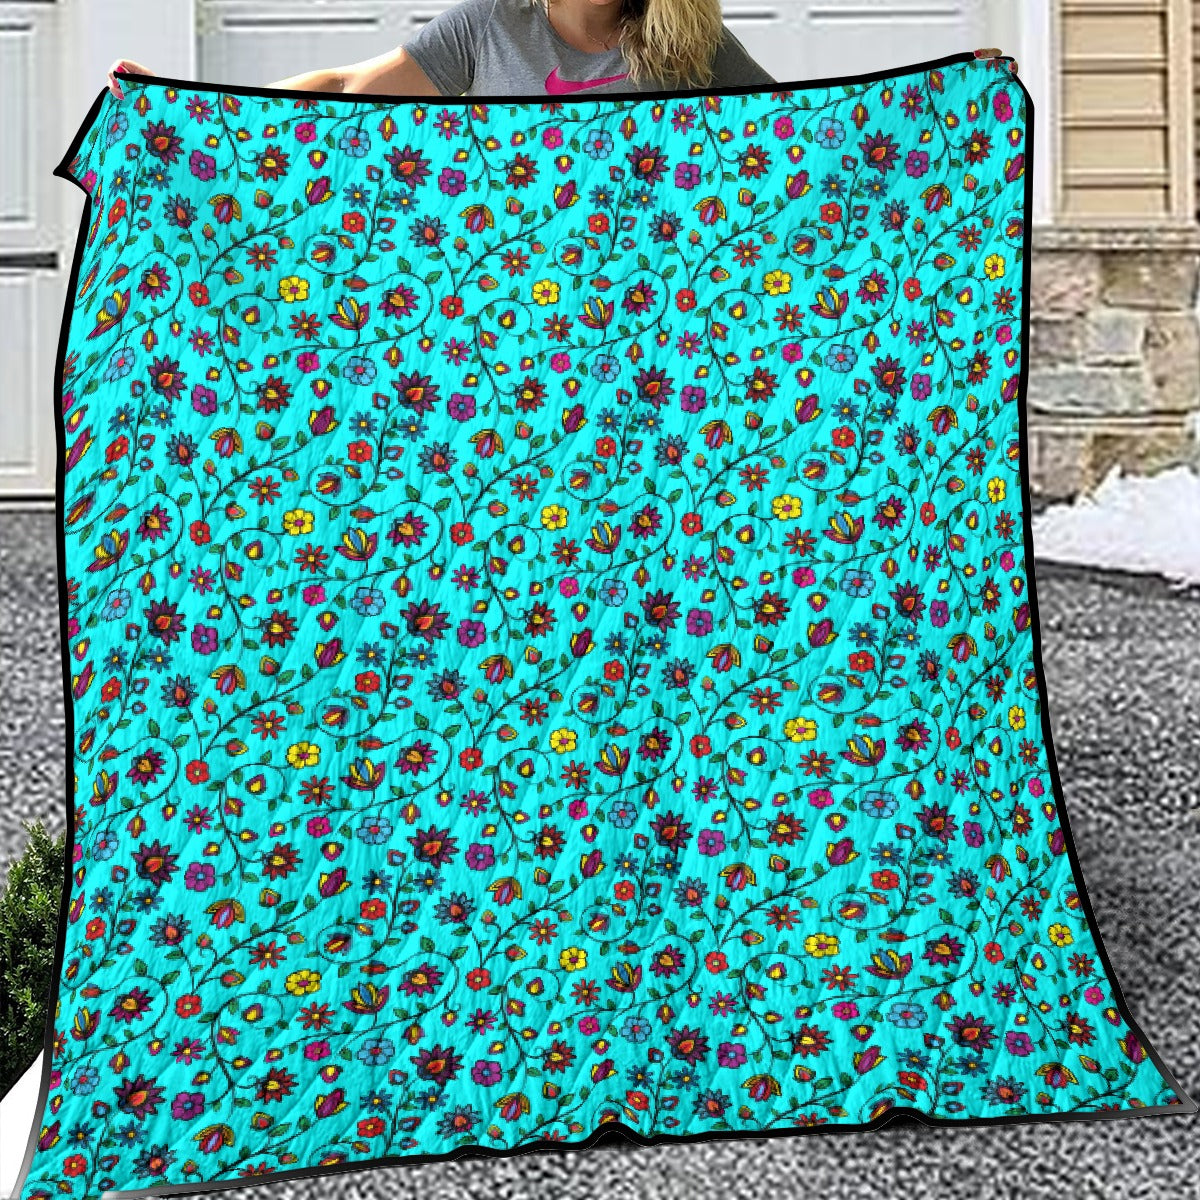 Nature's Nexus Turquoise Lightweight & Breathable Quilt With Edge-wrapping Strips